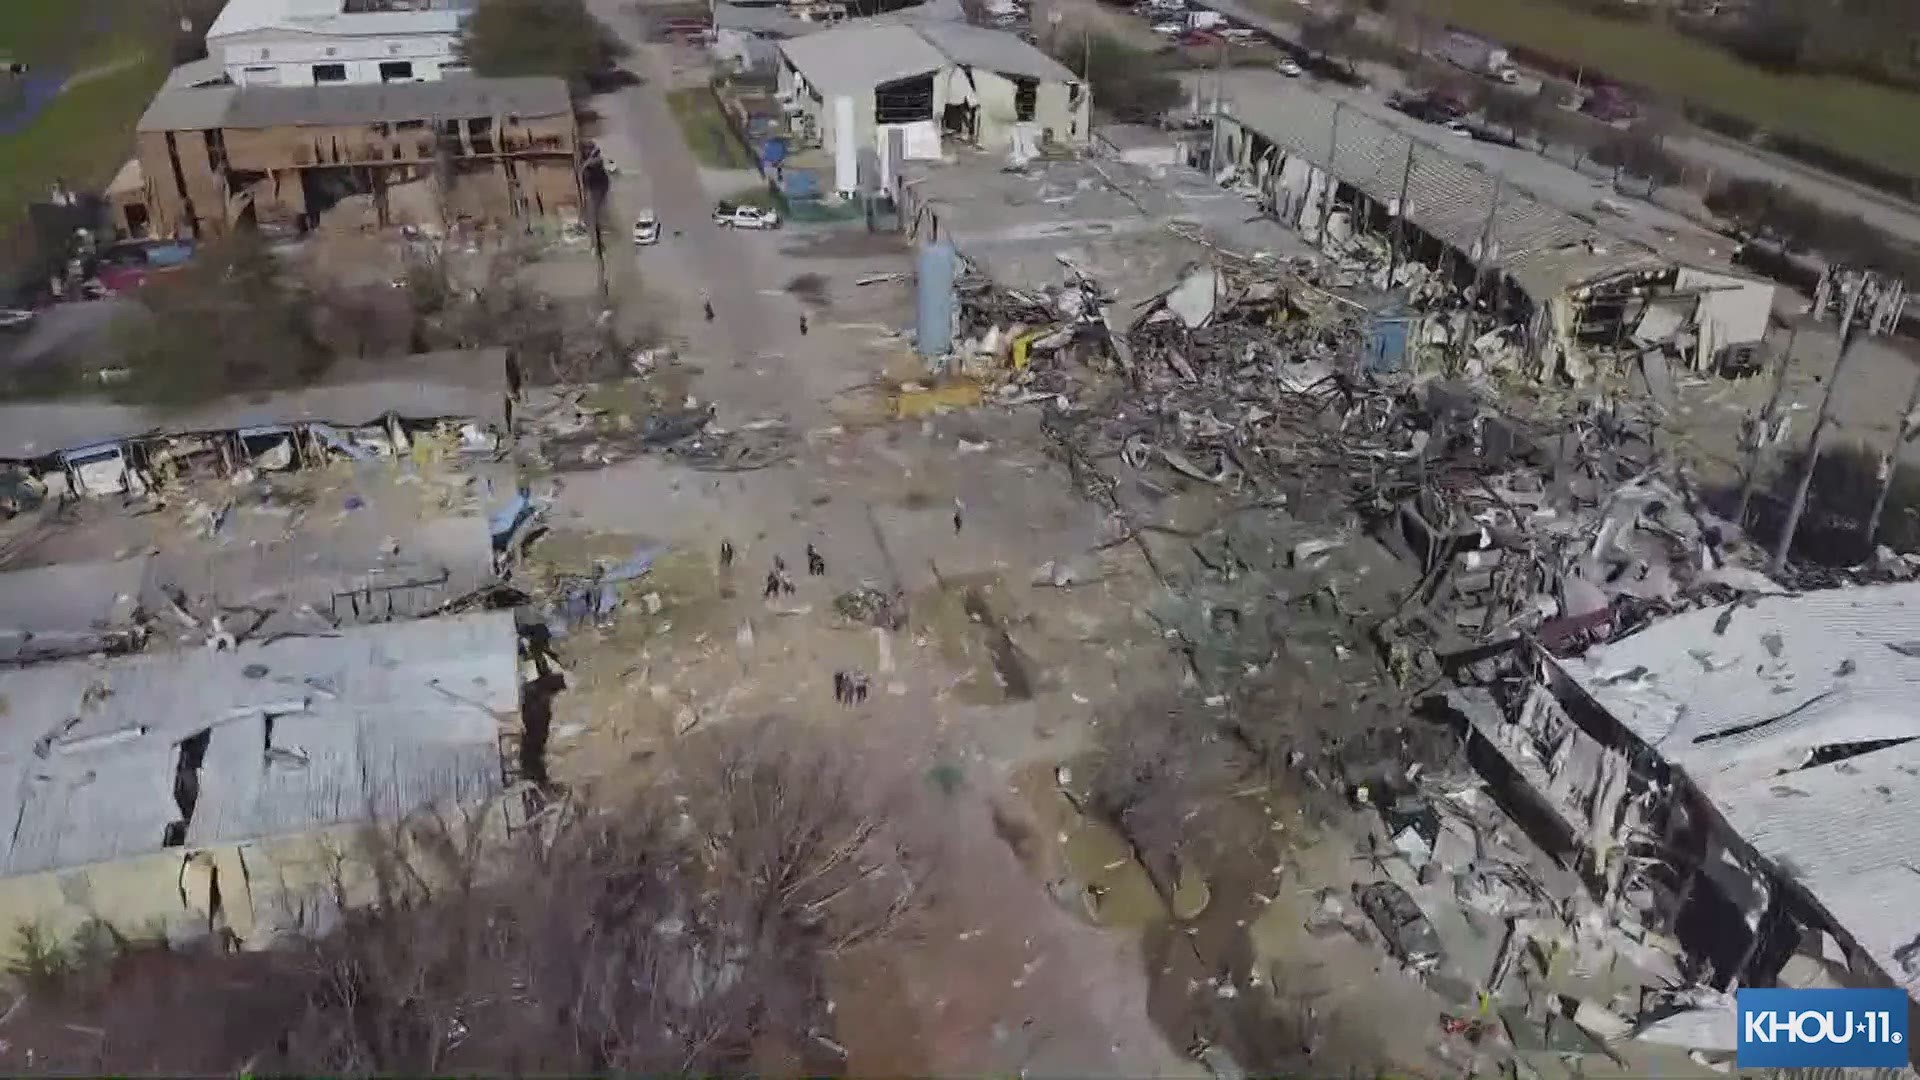 KHOU 11's Drone 11 captured this amazing video over the site of the explosion at Watson Grinding and Manufacturing in Northwest Houston.